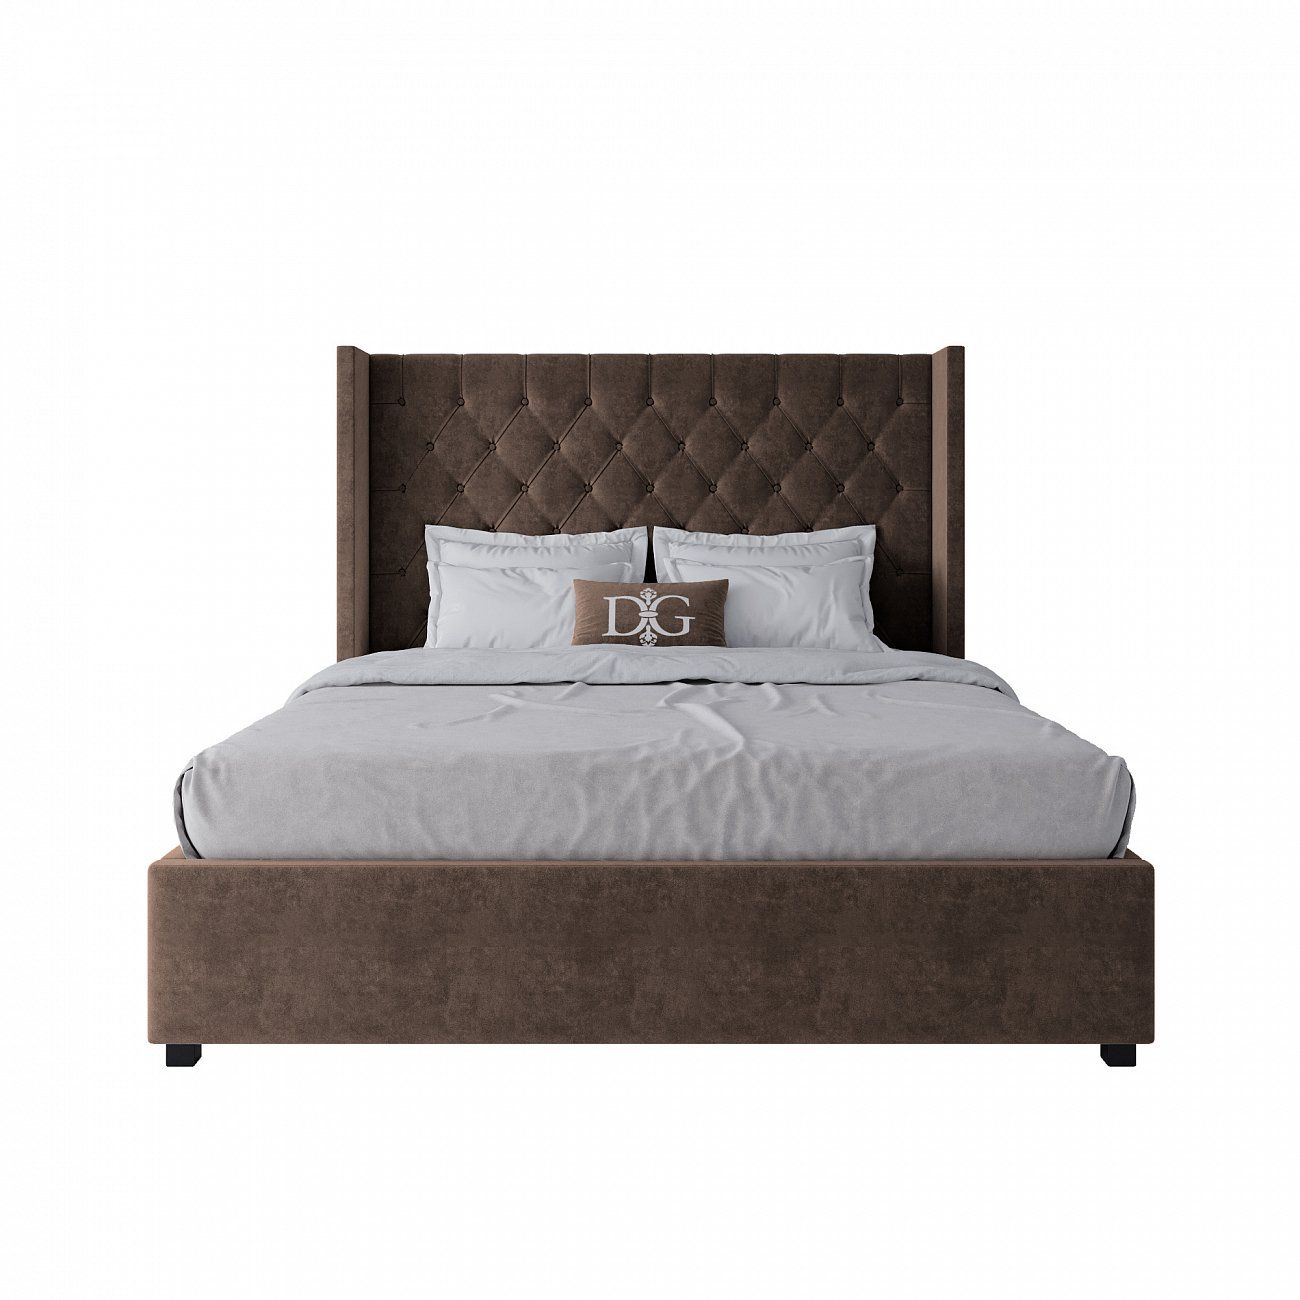 Double bed with upholstered headboard 160x200 cm brown Wing-2